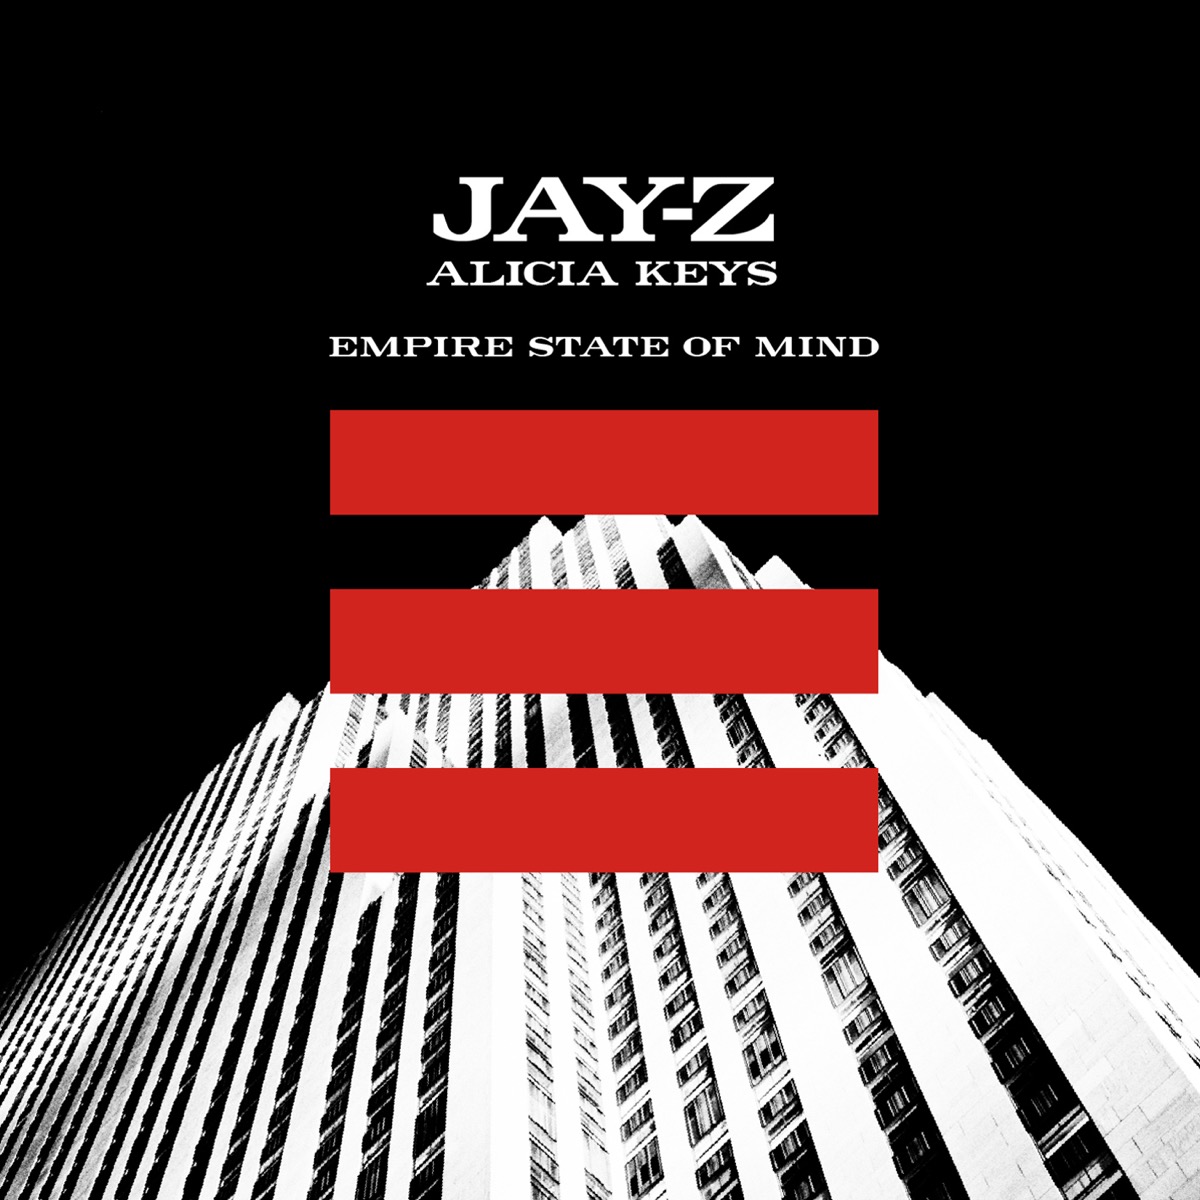 Single cover art for "Empire State of Mind" by Jay-Z ft. Alicia Keys